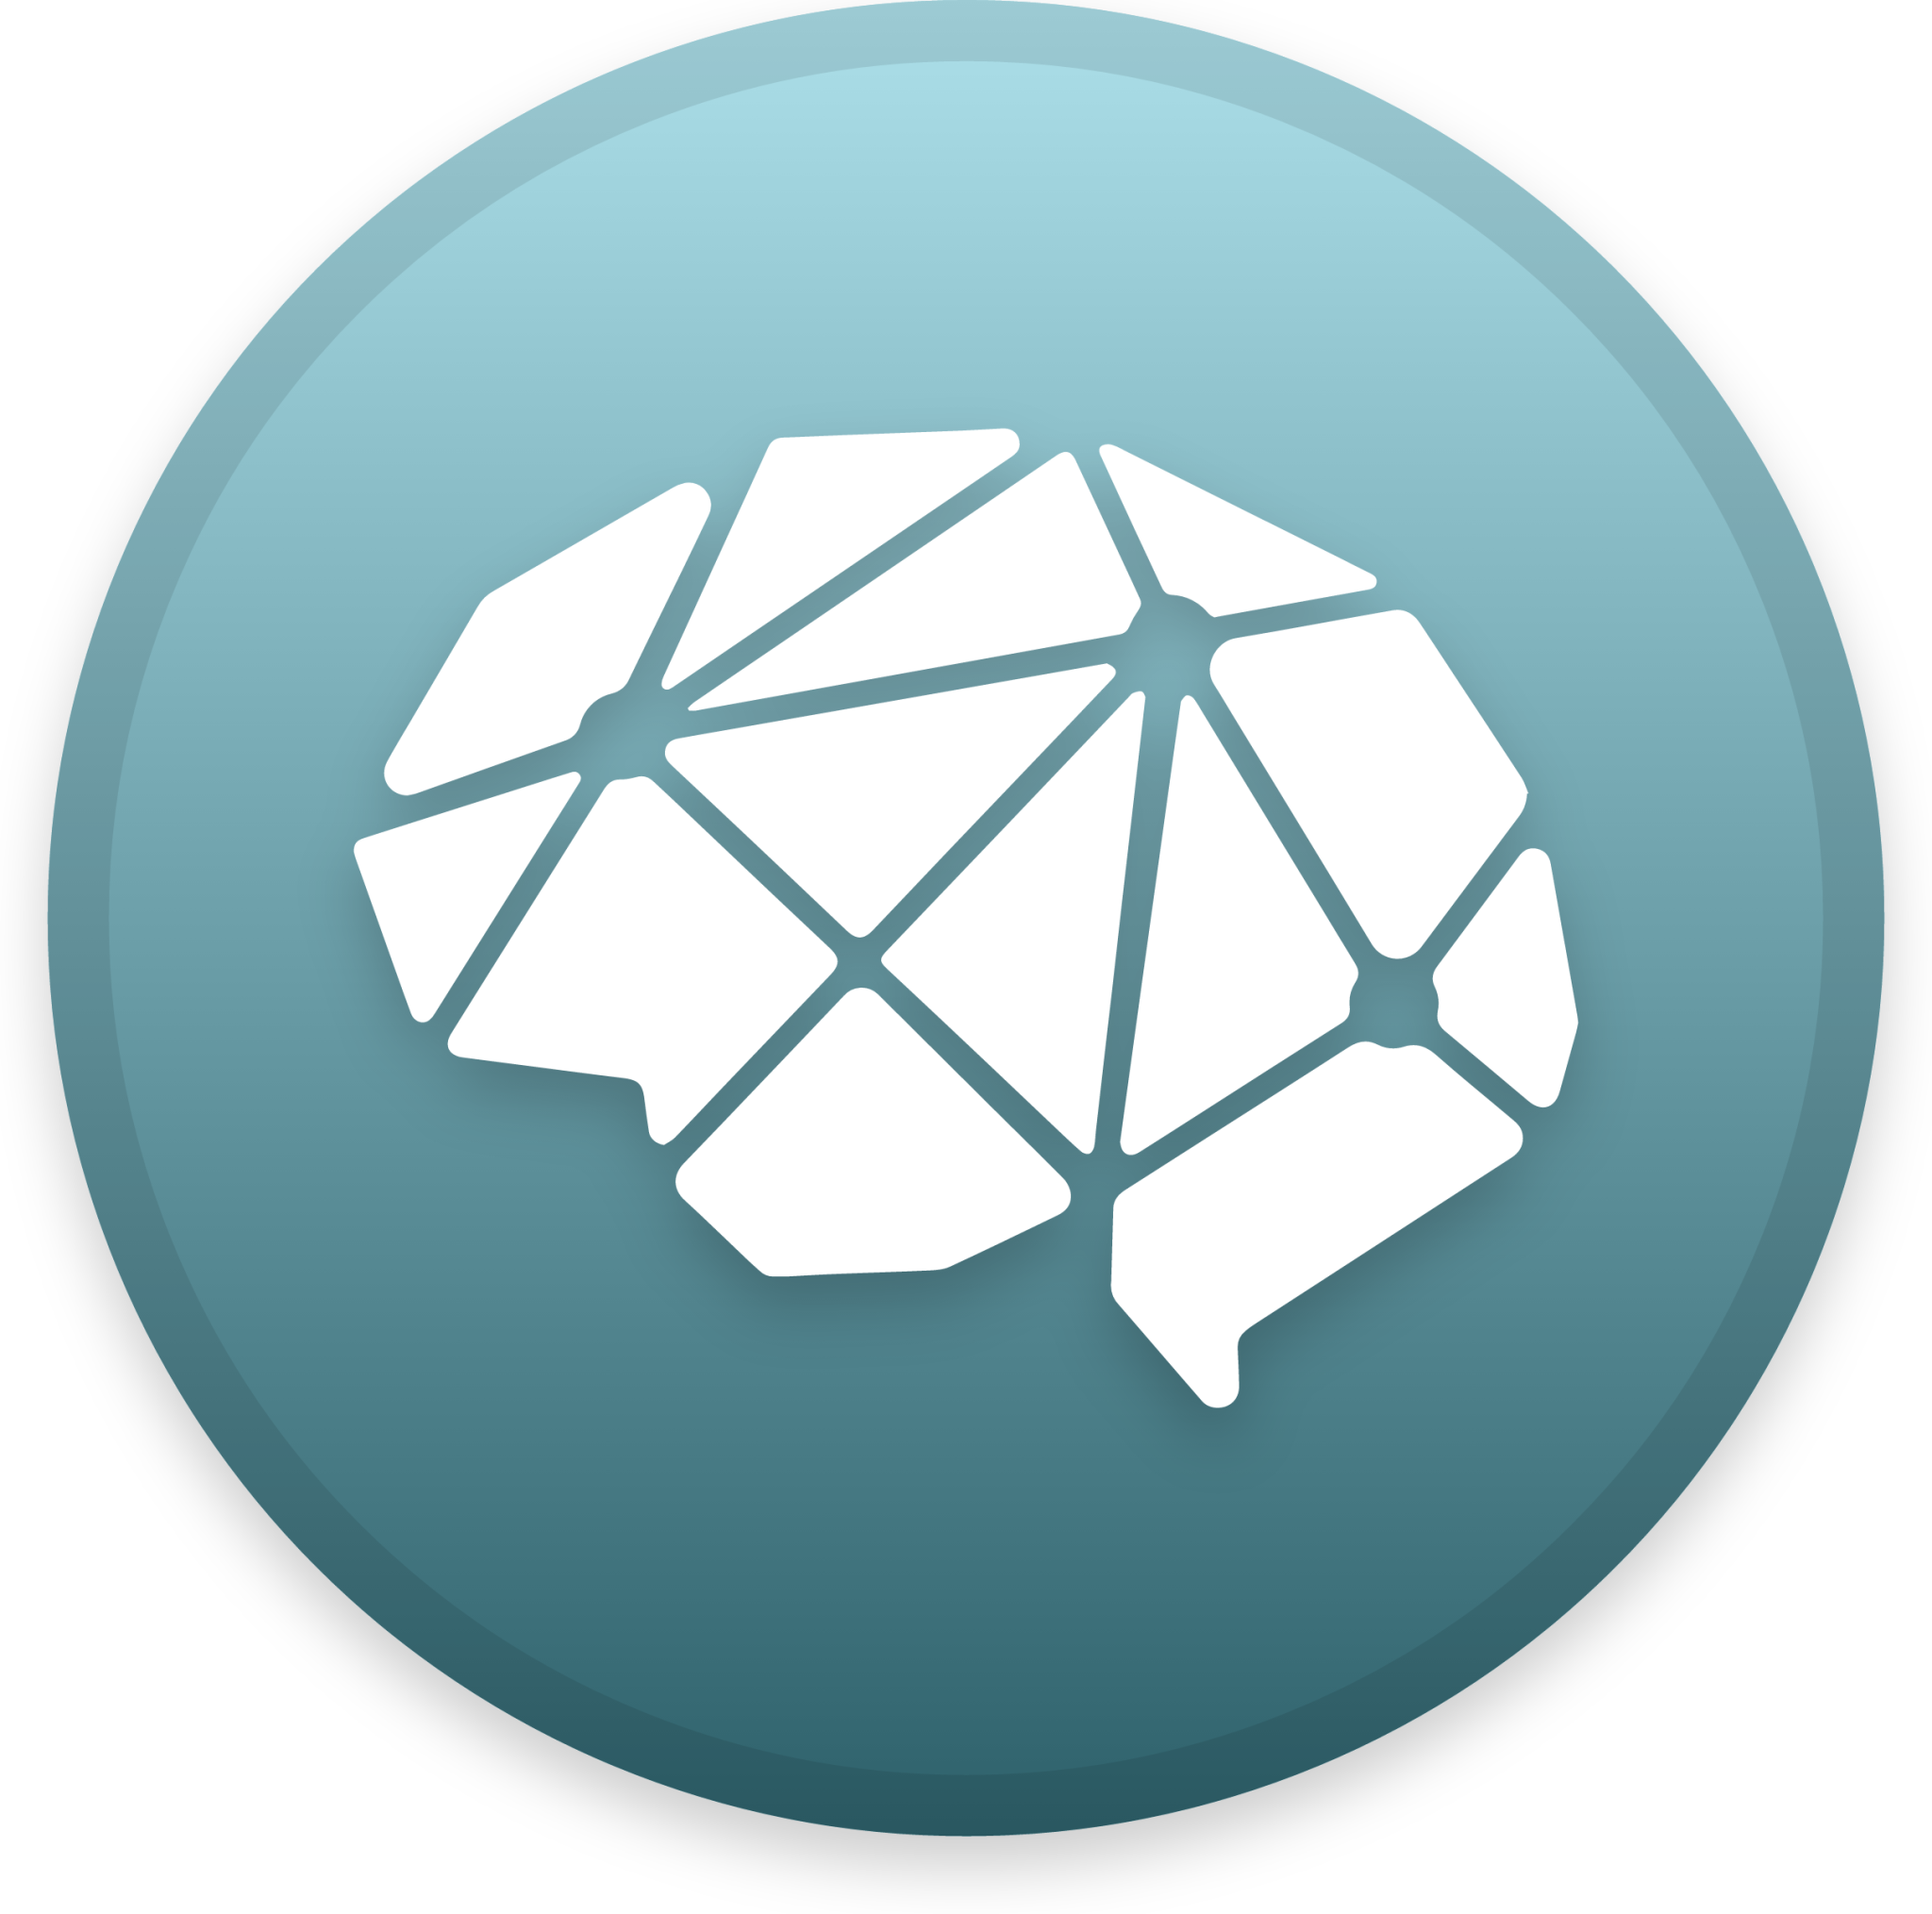 DeepBrain Chain Cryptocurrency icon